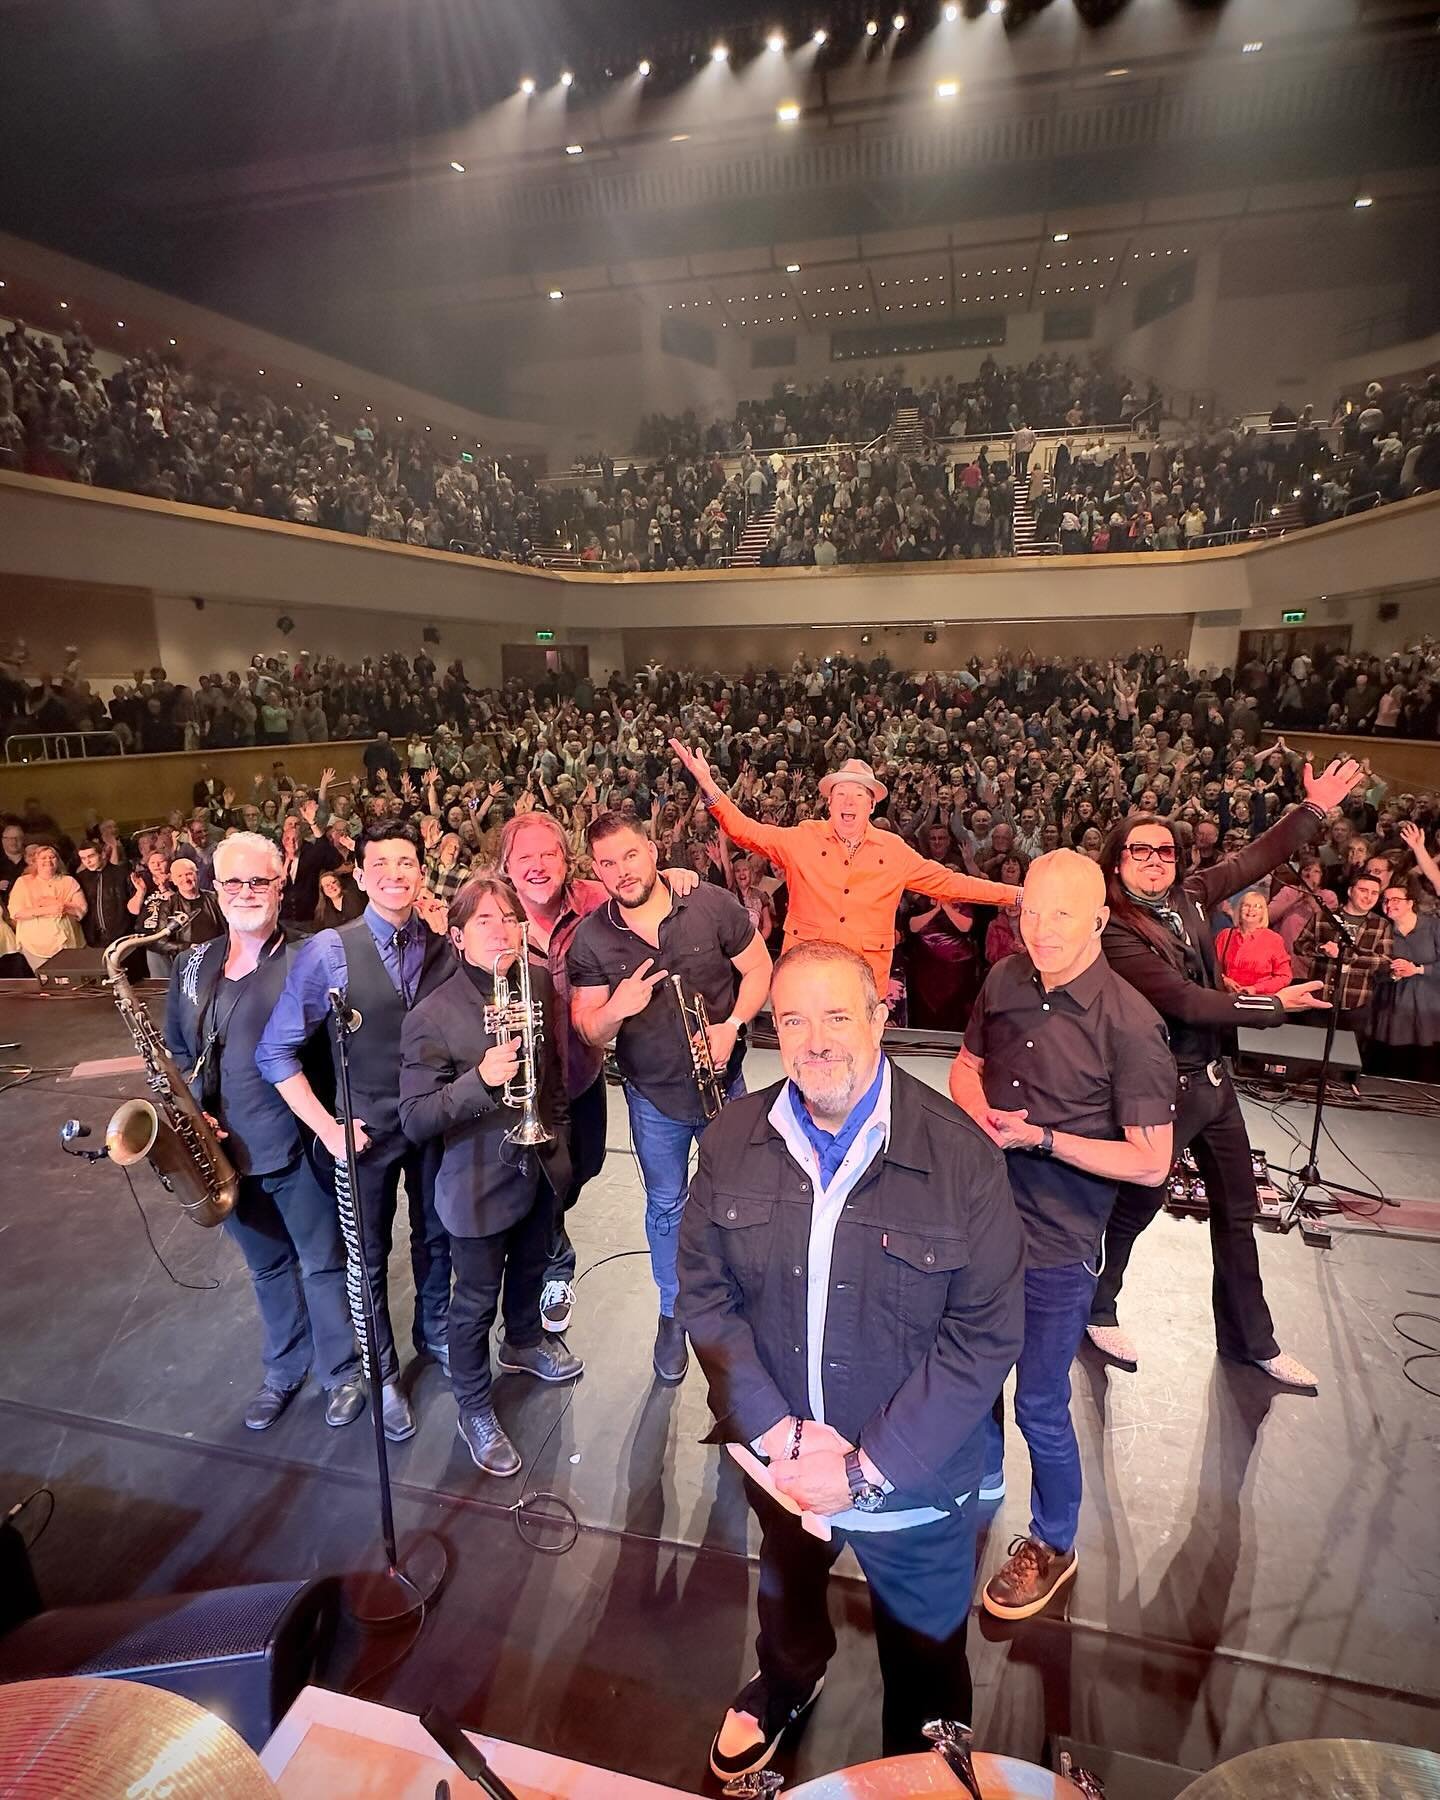 Glasgow! 🏴󠁧󠁢󠁳󠁣󠁴󠁿 What a special way to kick off the tour! Thanks to everyone for joining us for a SOLD OUT night at the Royal Concert Hall 👑 We&rsquo;ll see you next time!

📸 @michaelalanreynolds #TheMavericks #WorldTour24 #Glasgow